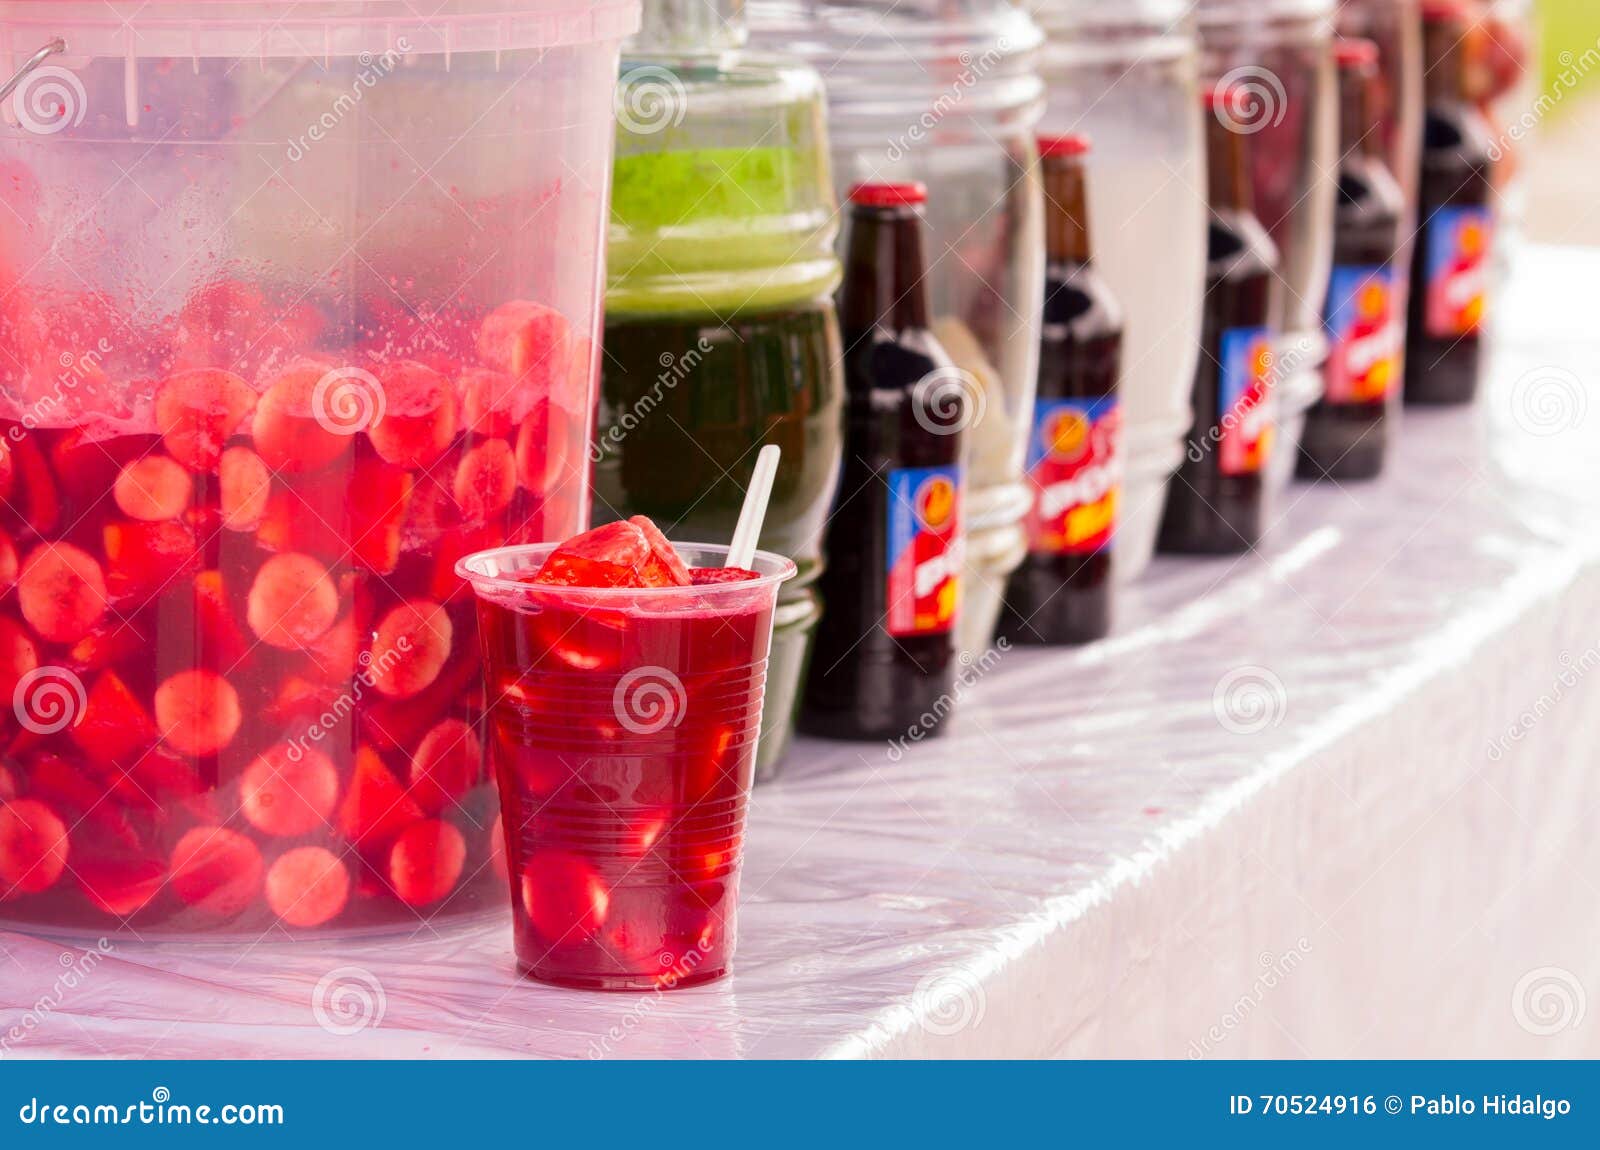 various beverages on market, traditional come y bebe on plastic glass